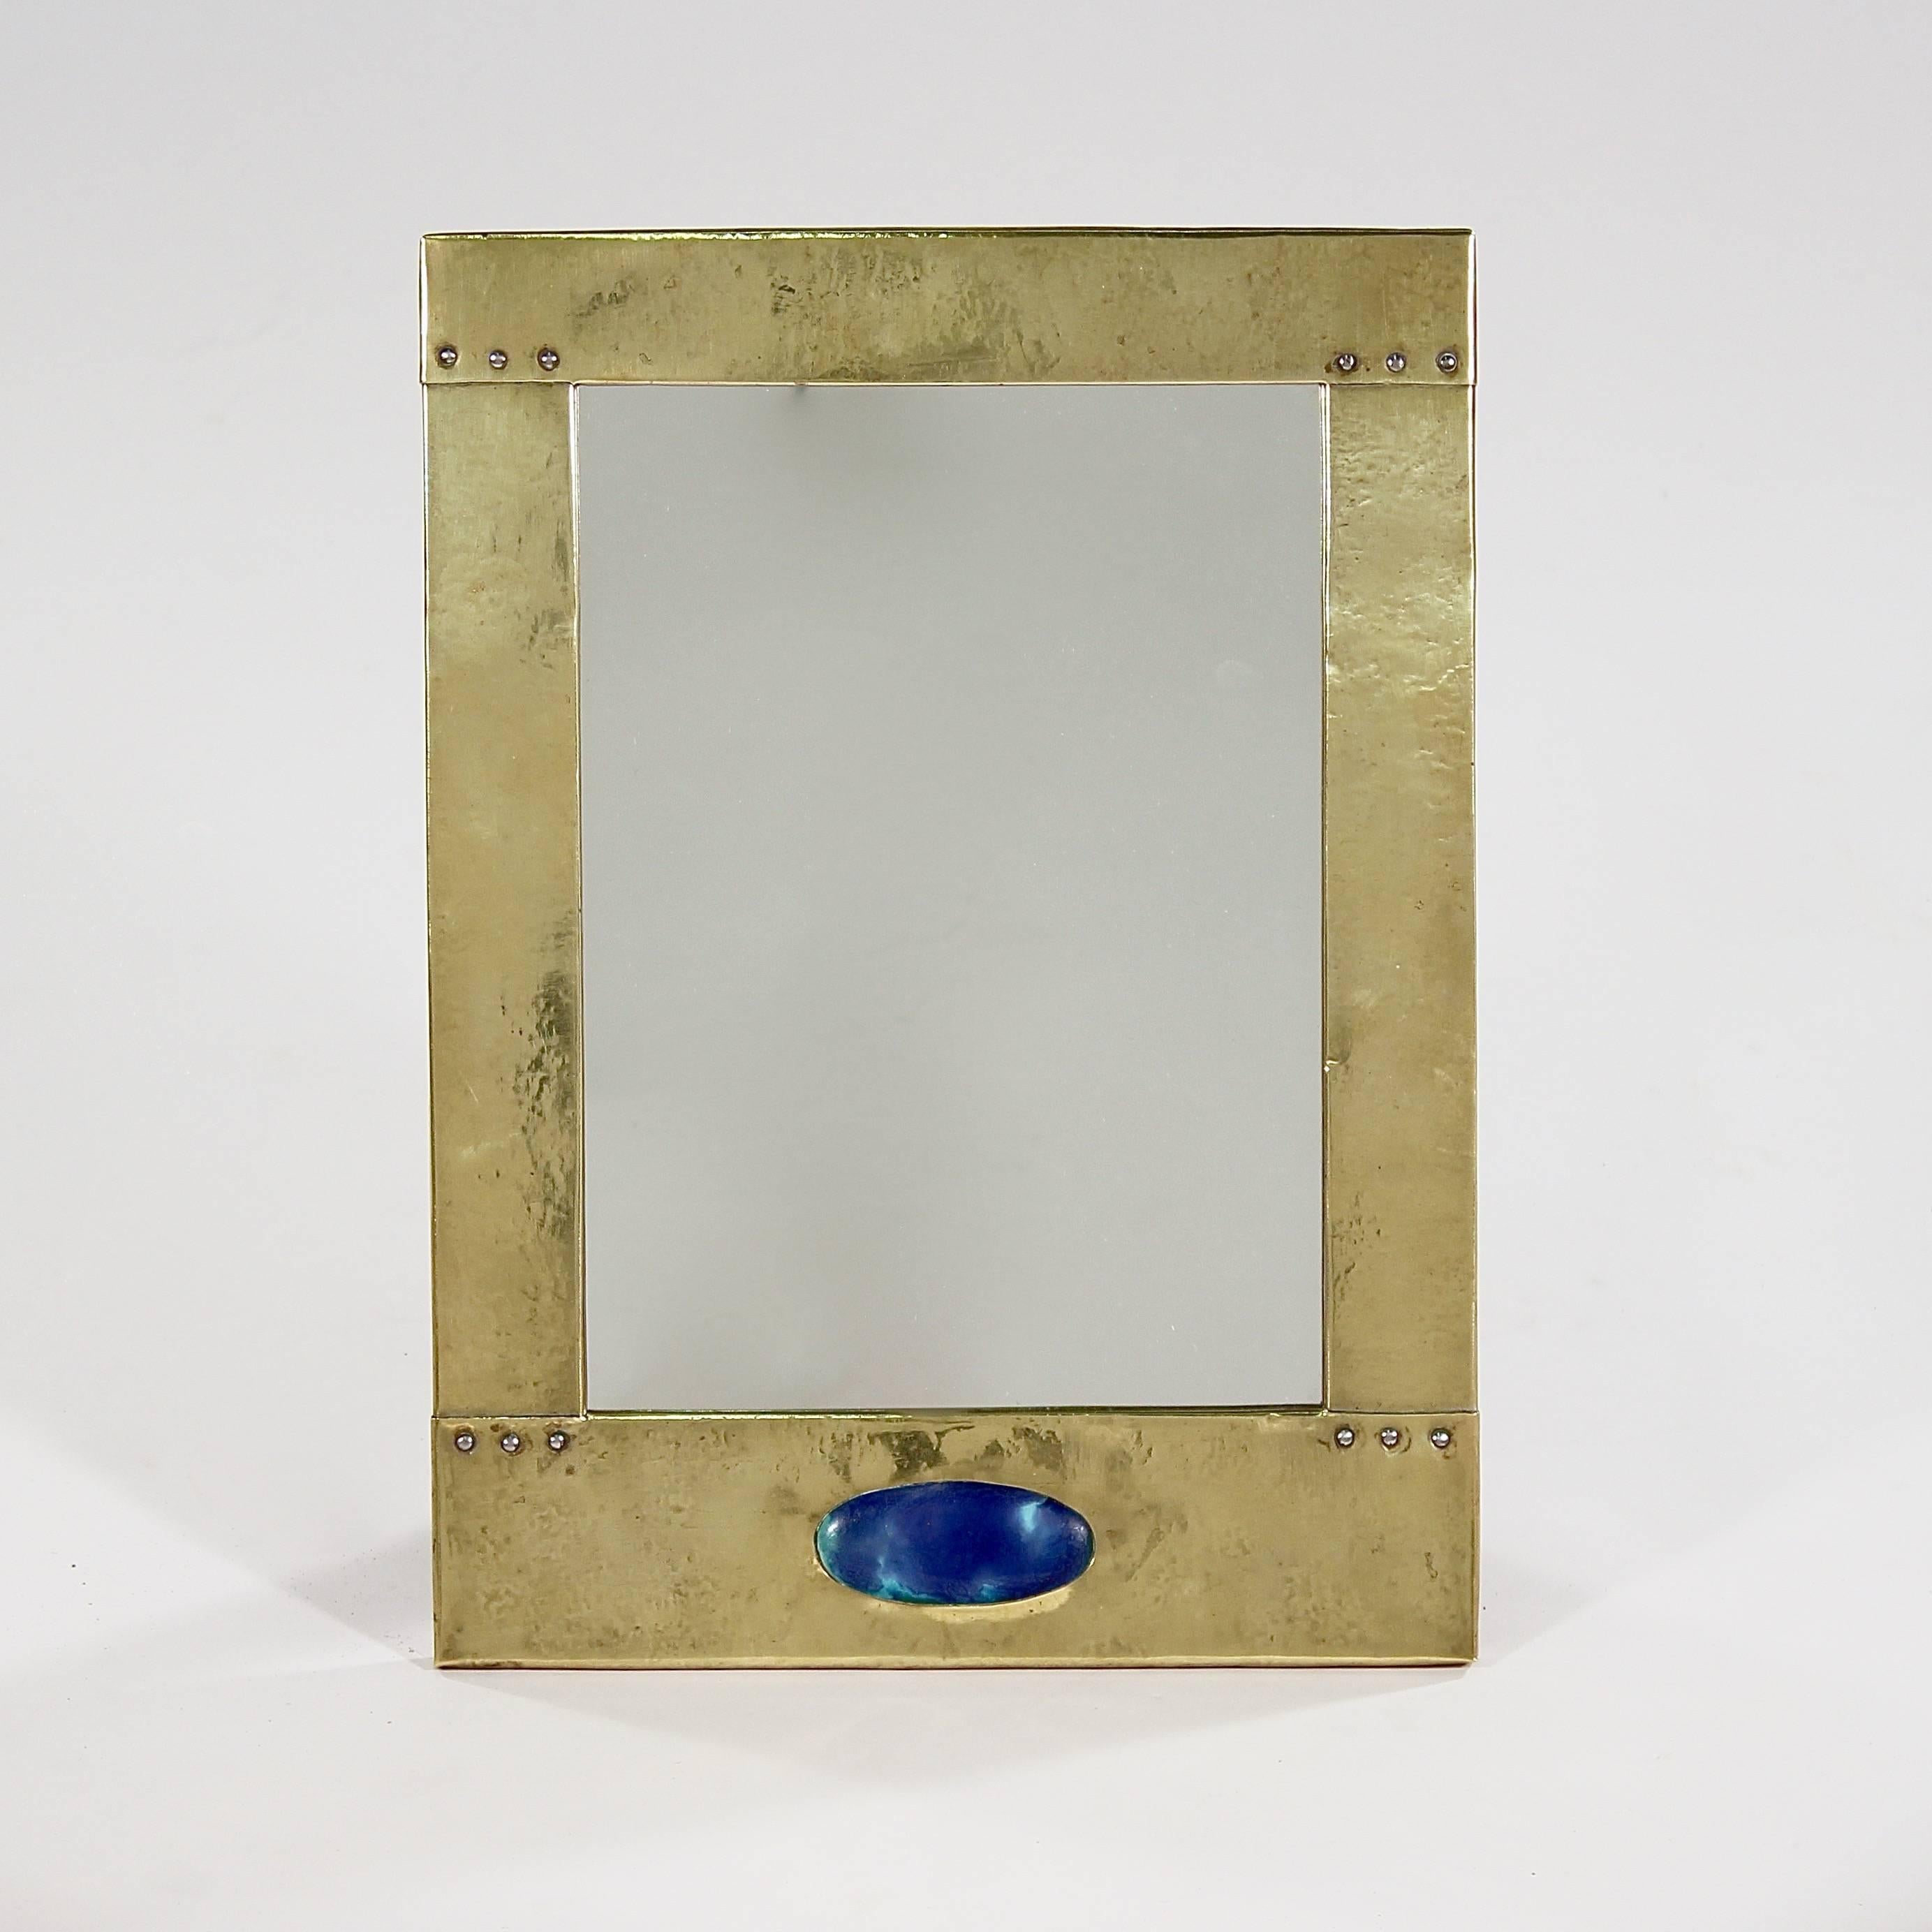 The brass clad rivetted frame with a central oval Ruskin Cabochon to the bottom.

England, circa 1910.